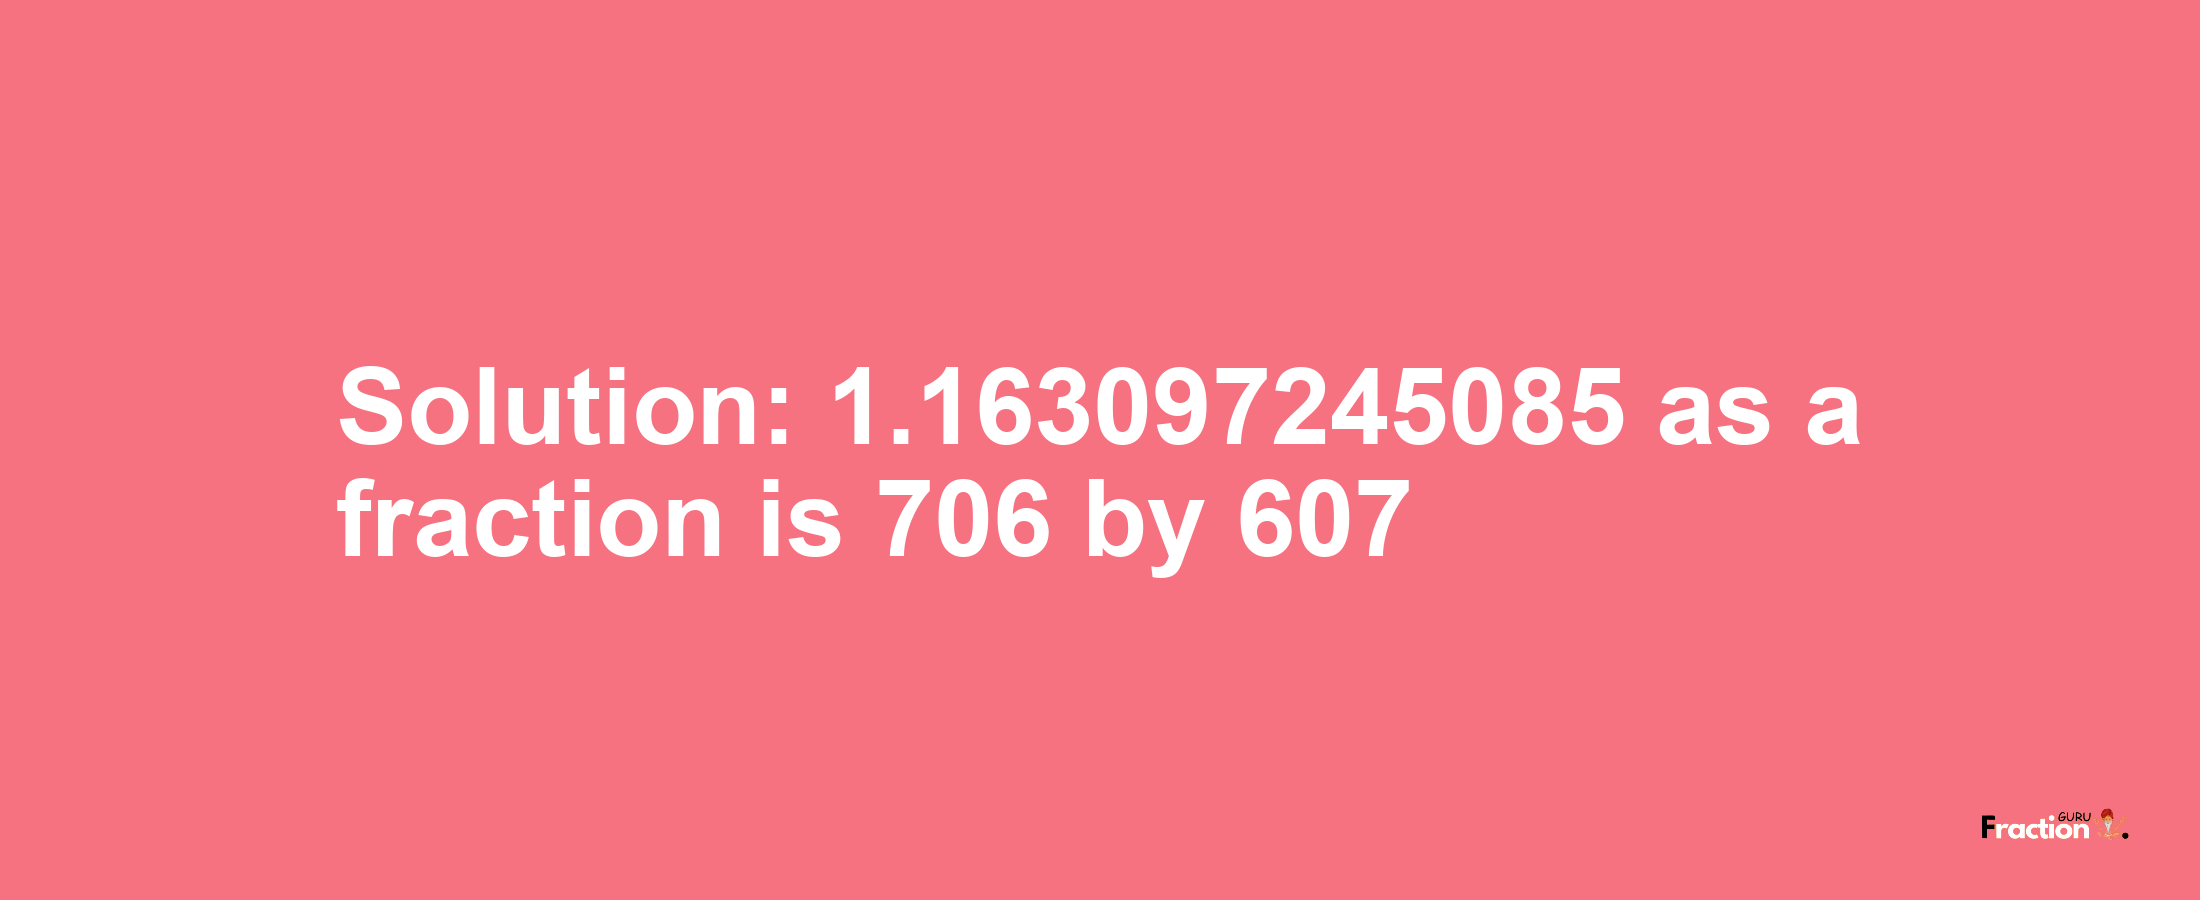 Solution:1.163097245085 as a fraction is 706/607